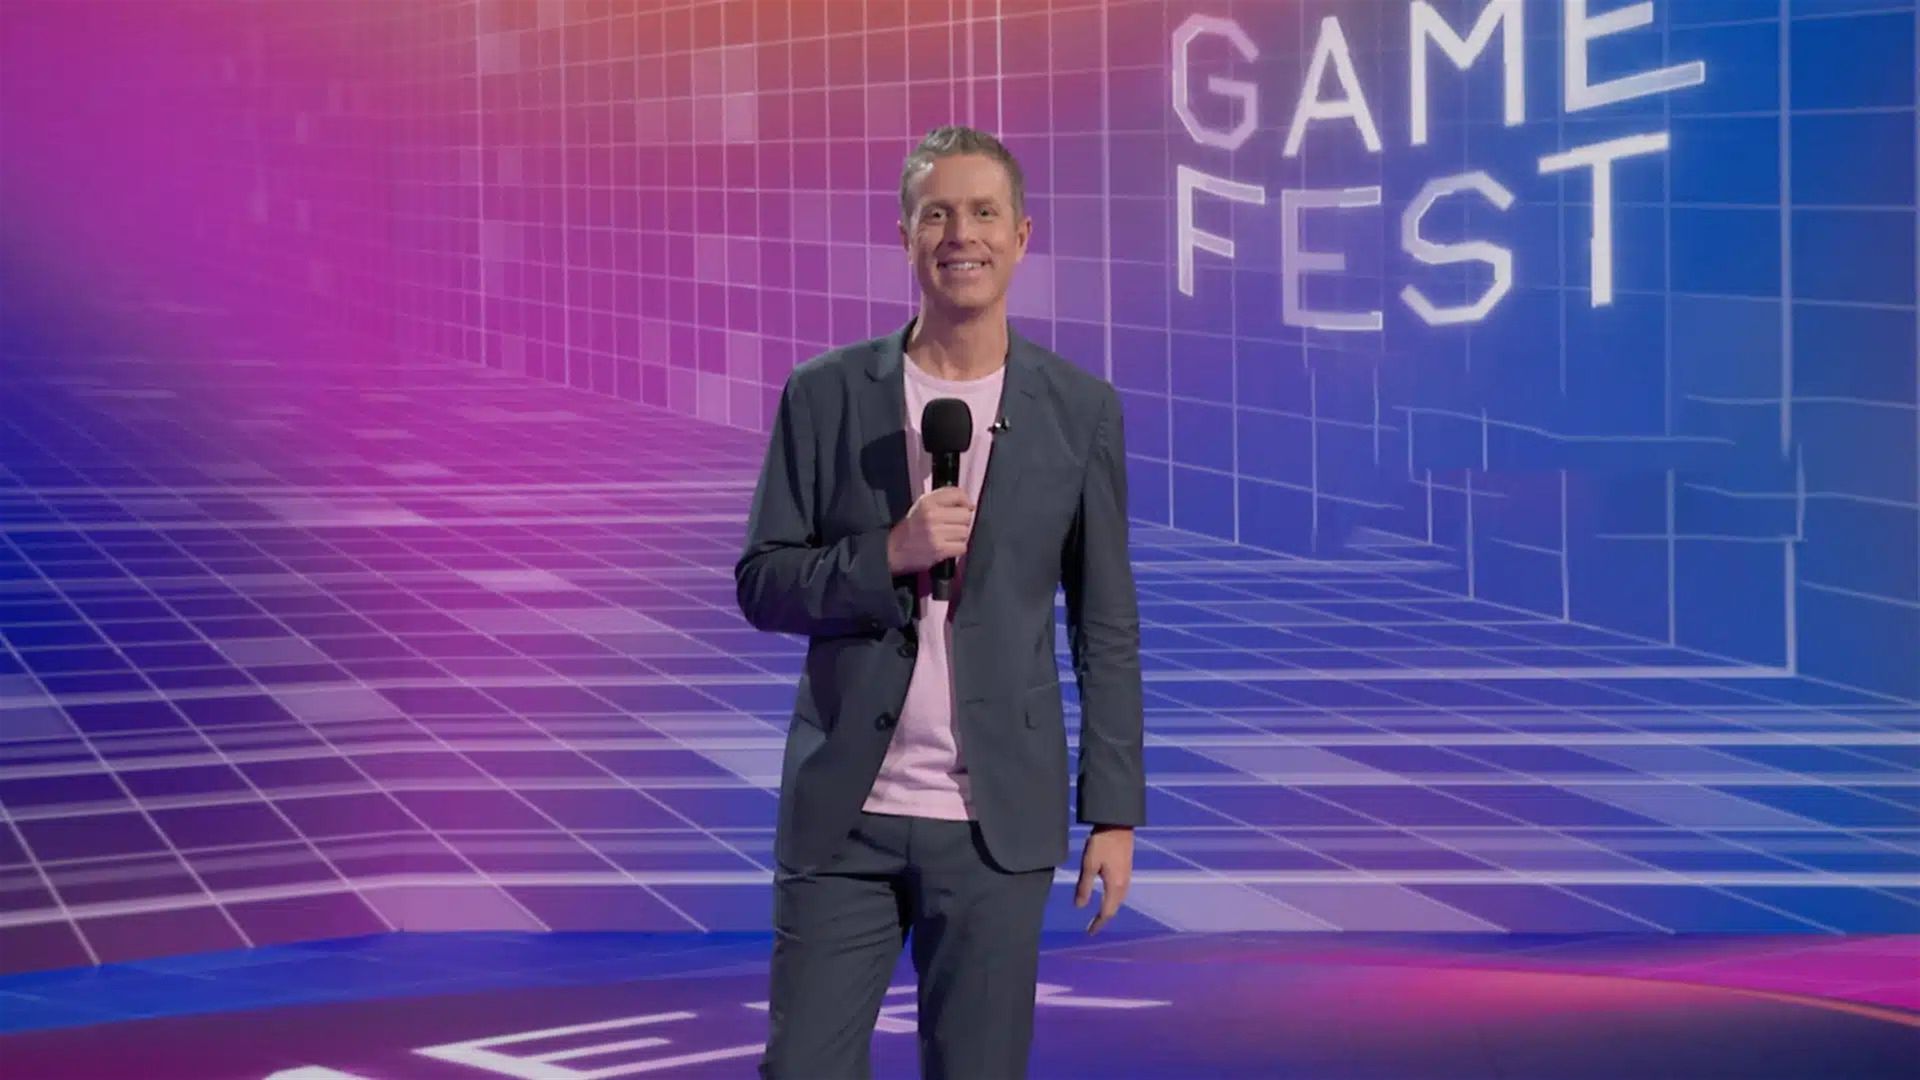 Geoff Keighley responds to the possible return of E3 with the